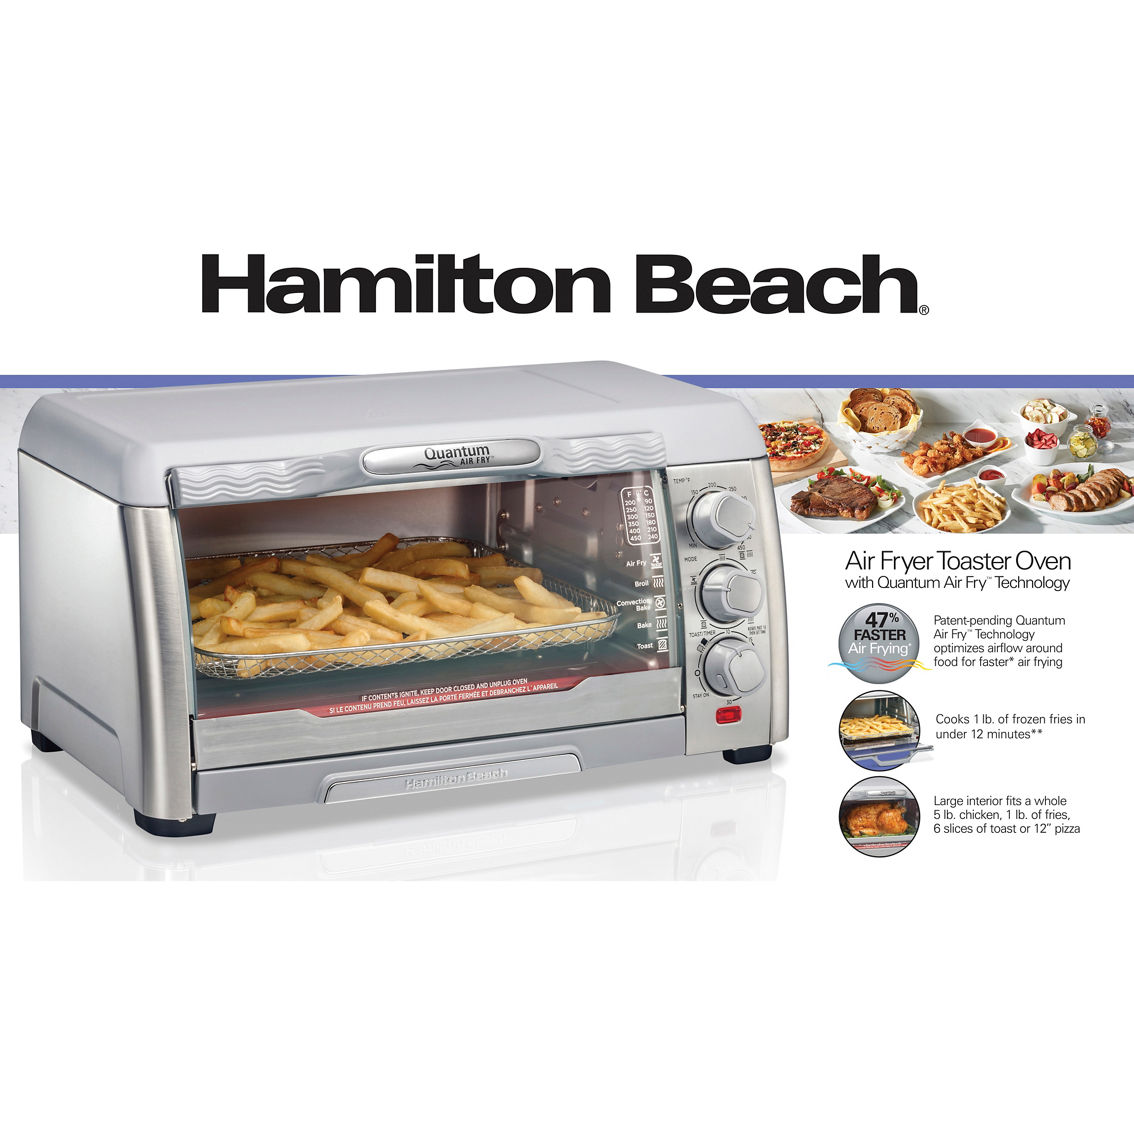 Hamilton Beach Air Fryer Toaster Oven with Quantum Air Fry - Image 3 of 4